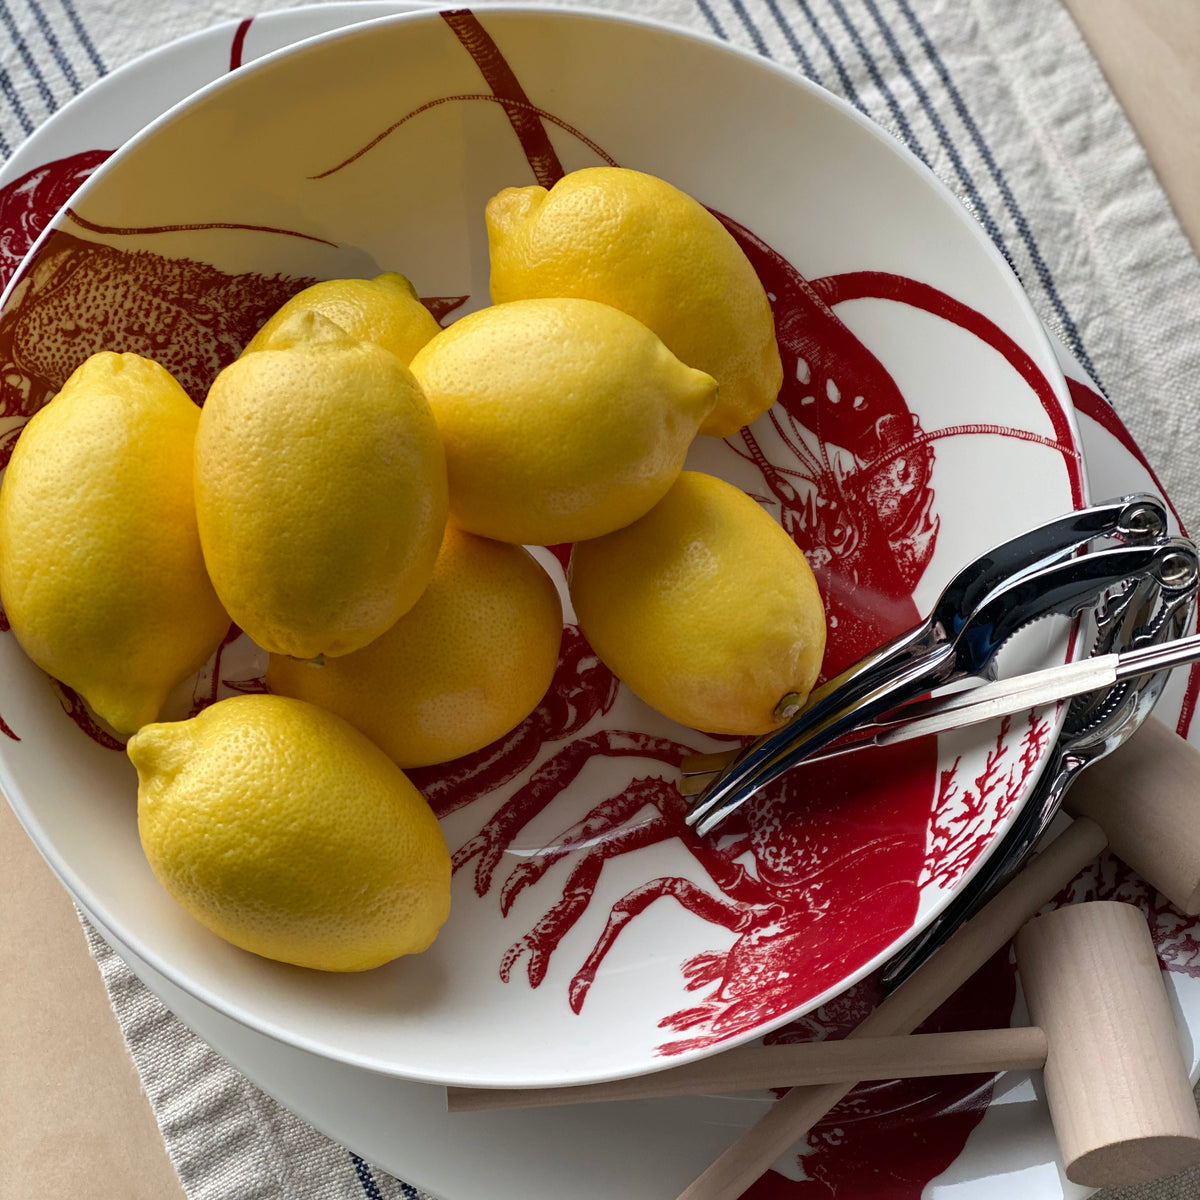 A white Lobster Wide Serving Bowl from Caskata Artisanal Home with a red lobster illustration holds several yellow lemons, a lemon squeezer, and a fork on a striped cloth background, capturing the essence of seaside style tableware.